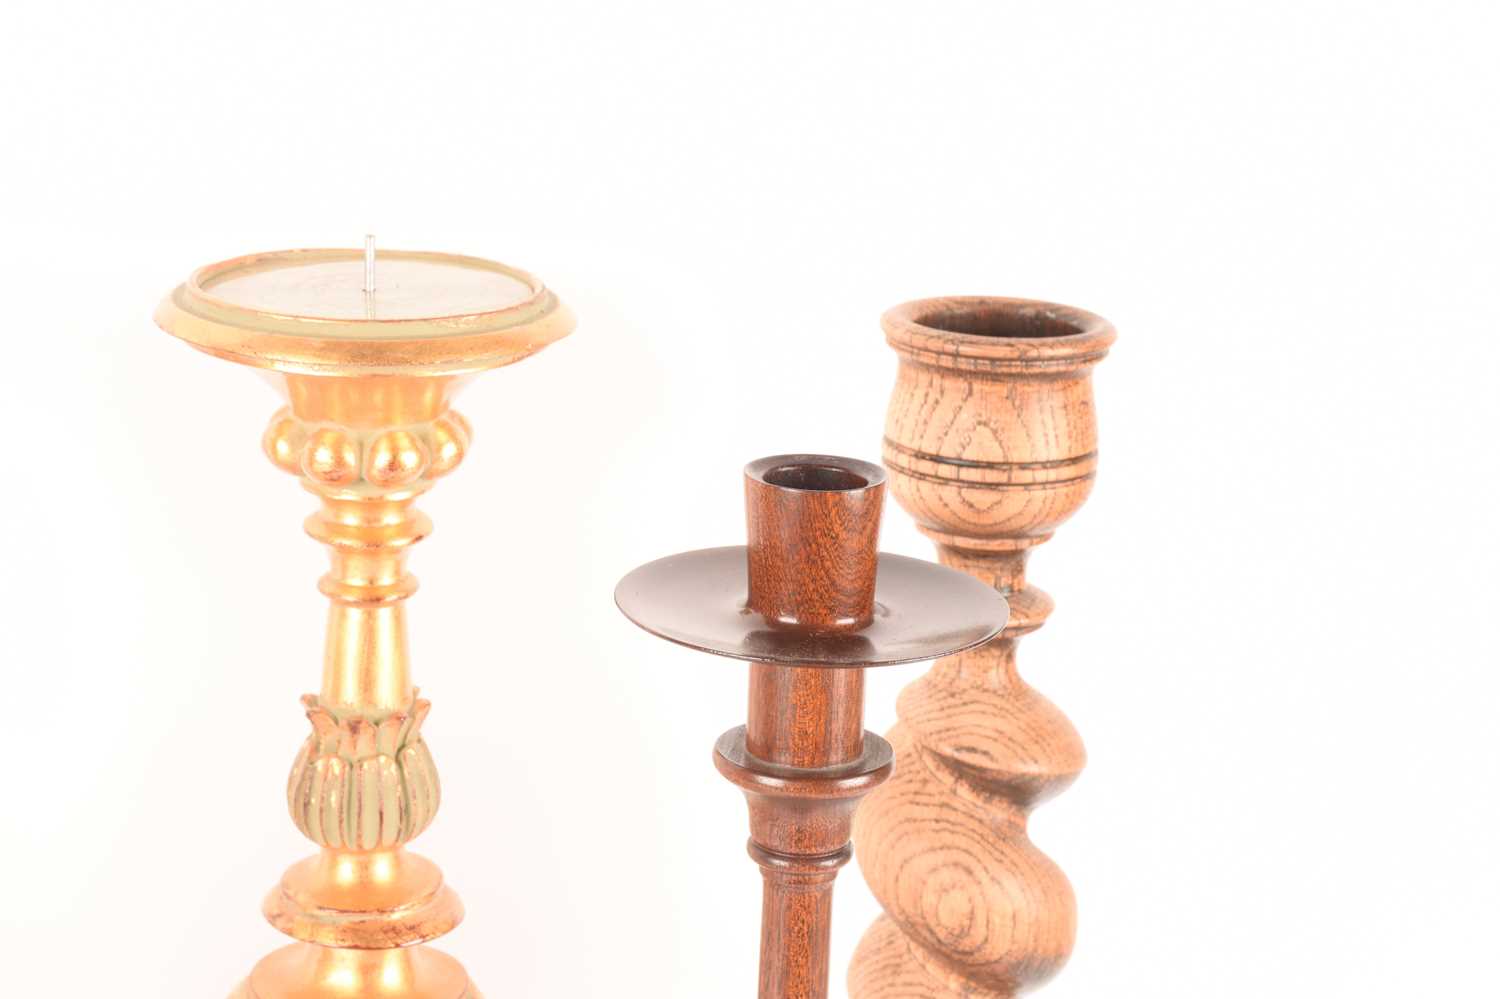 A pair of Mulberry Home oak barley twist and acanthus design candlesticks with Mulberry England labe - Image 4 of 5